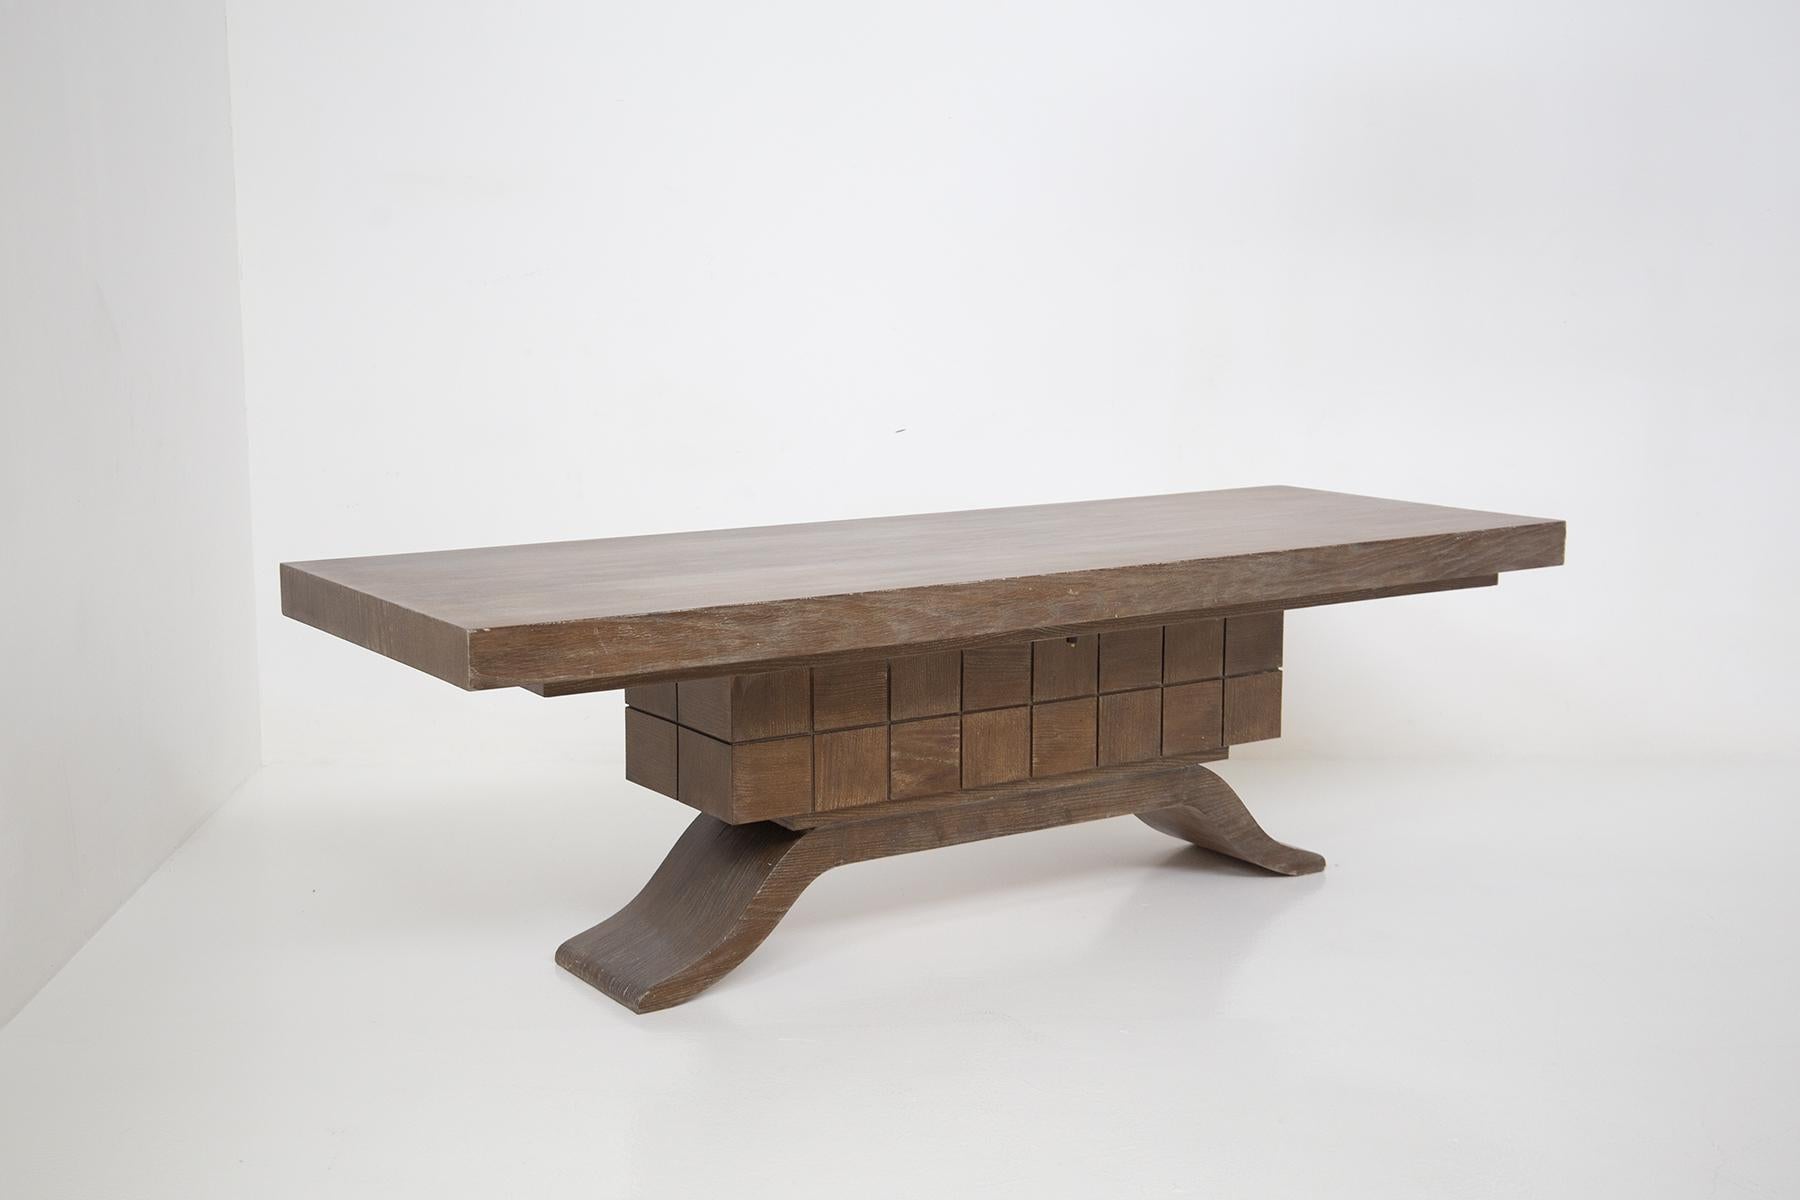 Large dining table attributed to Guglielmo Ulrich made entirely of wood. The table has a central rectangular pedestal with square carvings. The feet are made of sinuously curved wood almost representing a semi-corner.
The table comes from a